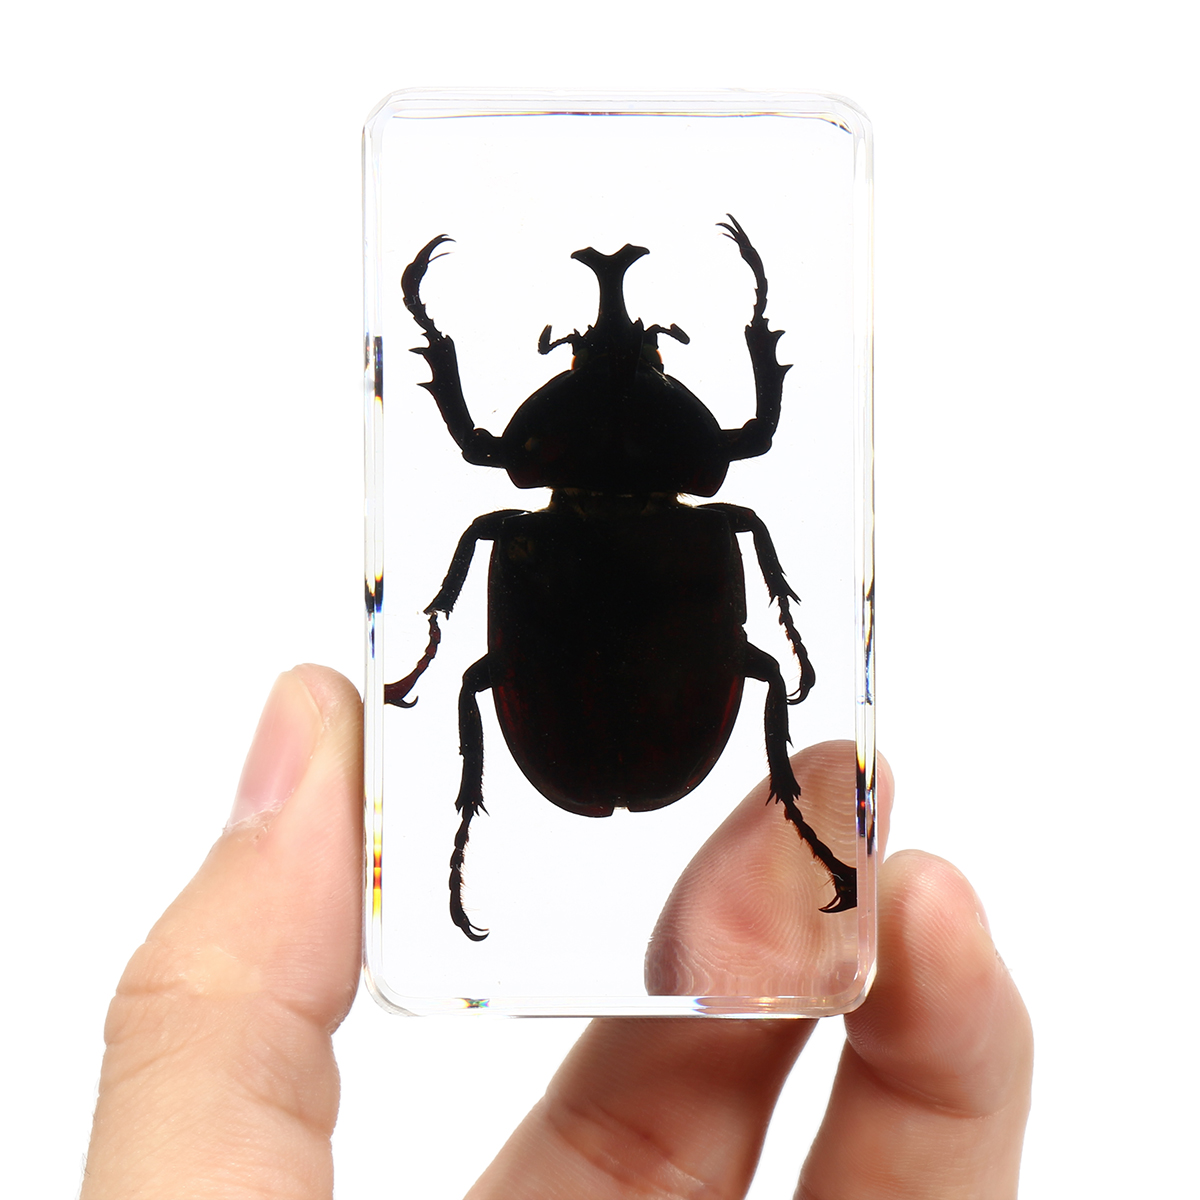 Clear-Acrylic-Lucite-Insect-Specimen-Spider-Black-Longhorn-Beetle-Scorpions-Craft-Science-Toy-1328098-6